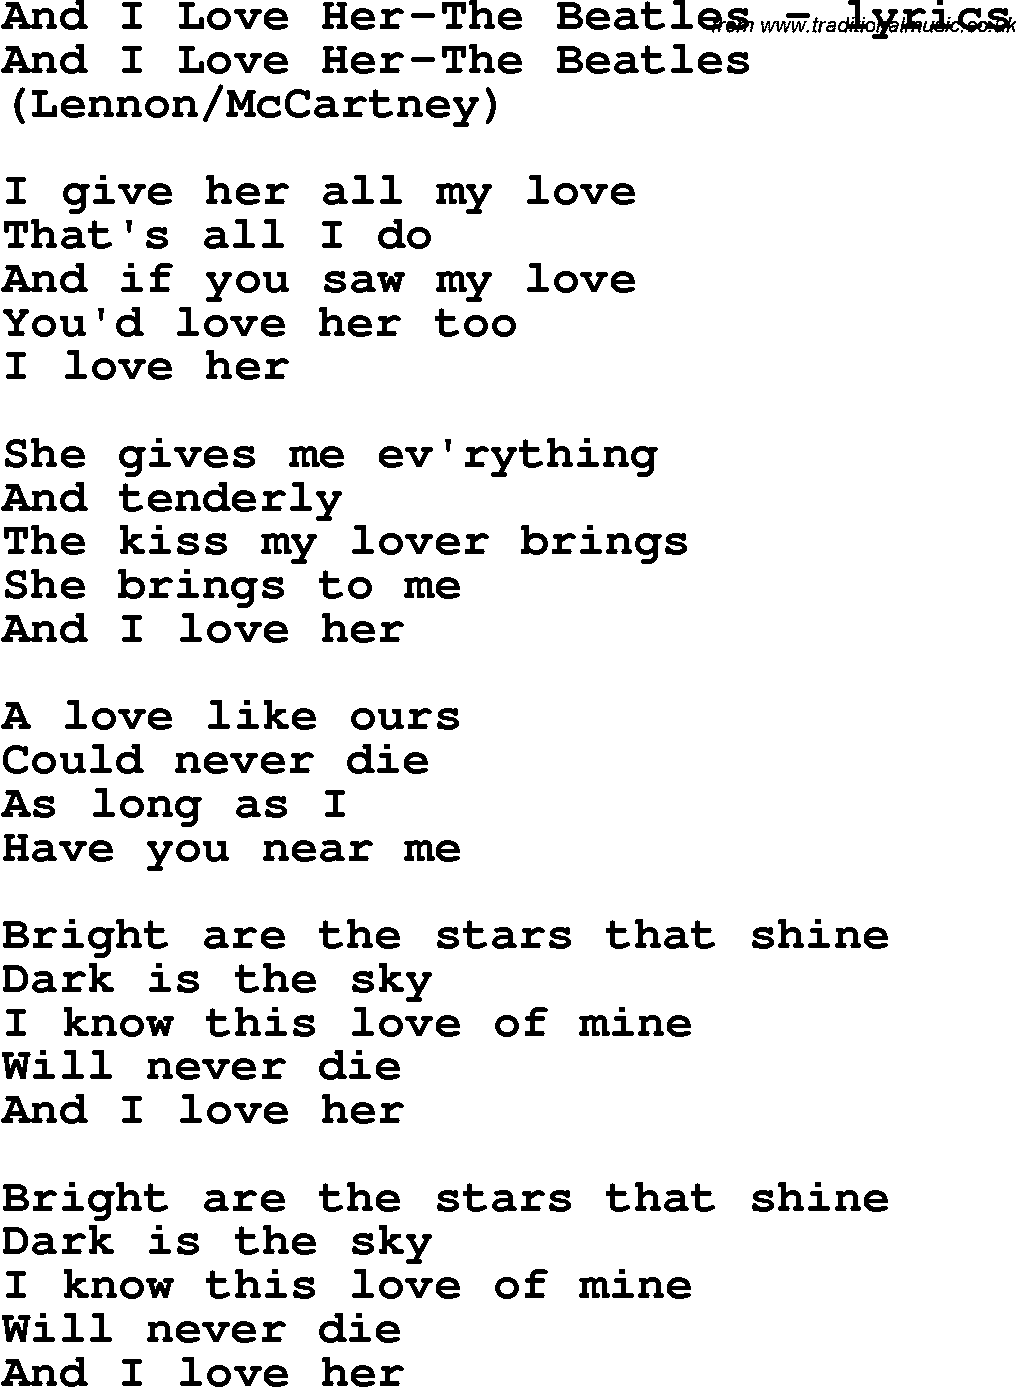 Love Song Lyrics for: And I Love Her-The Beatles